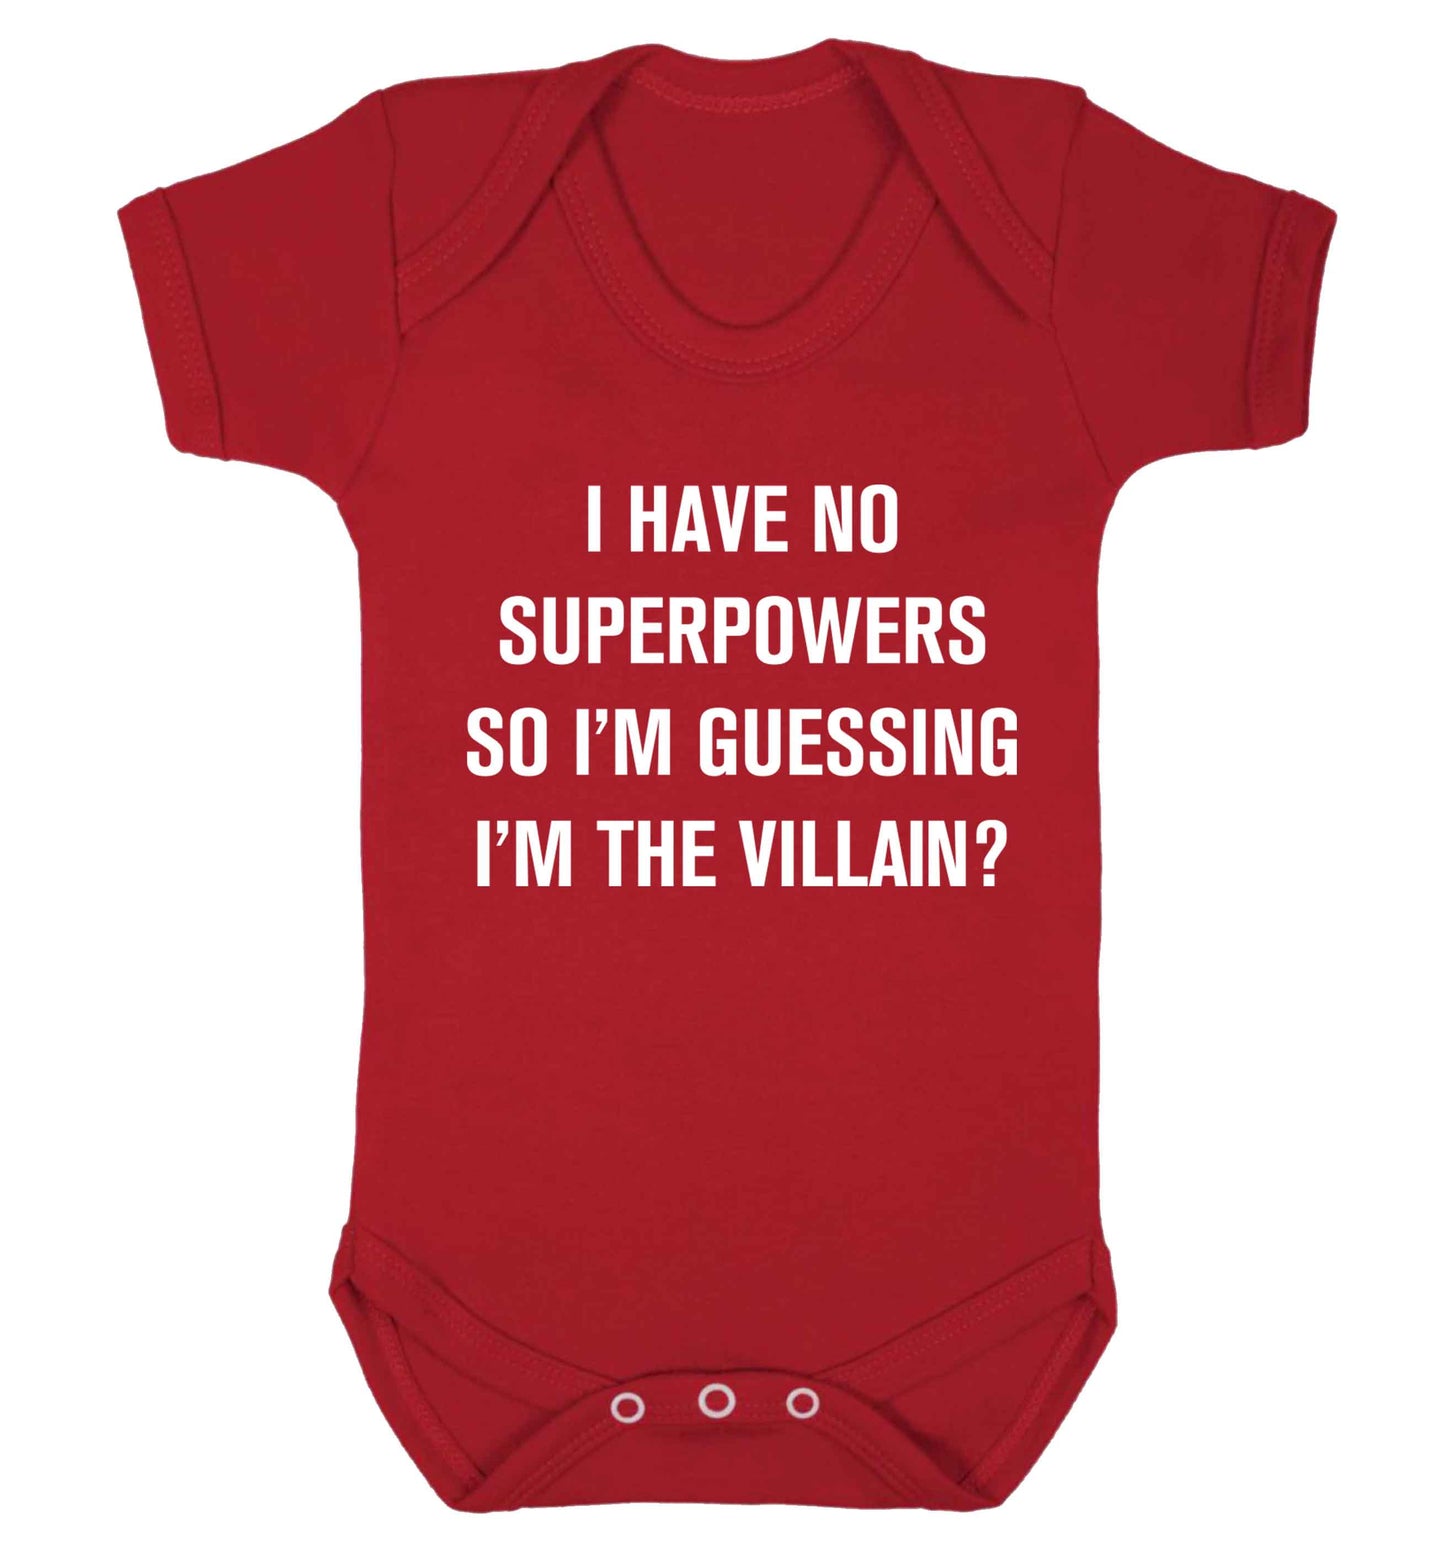 I have no superpowers so I'm guessing I'm the villain? Baby Vest red 18-24 months